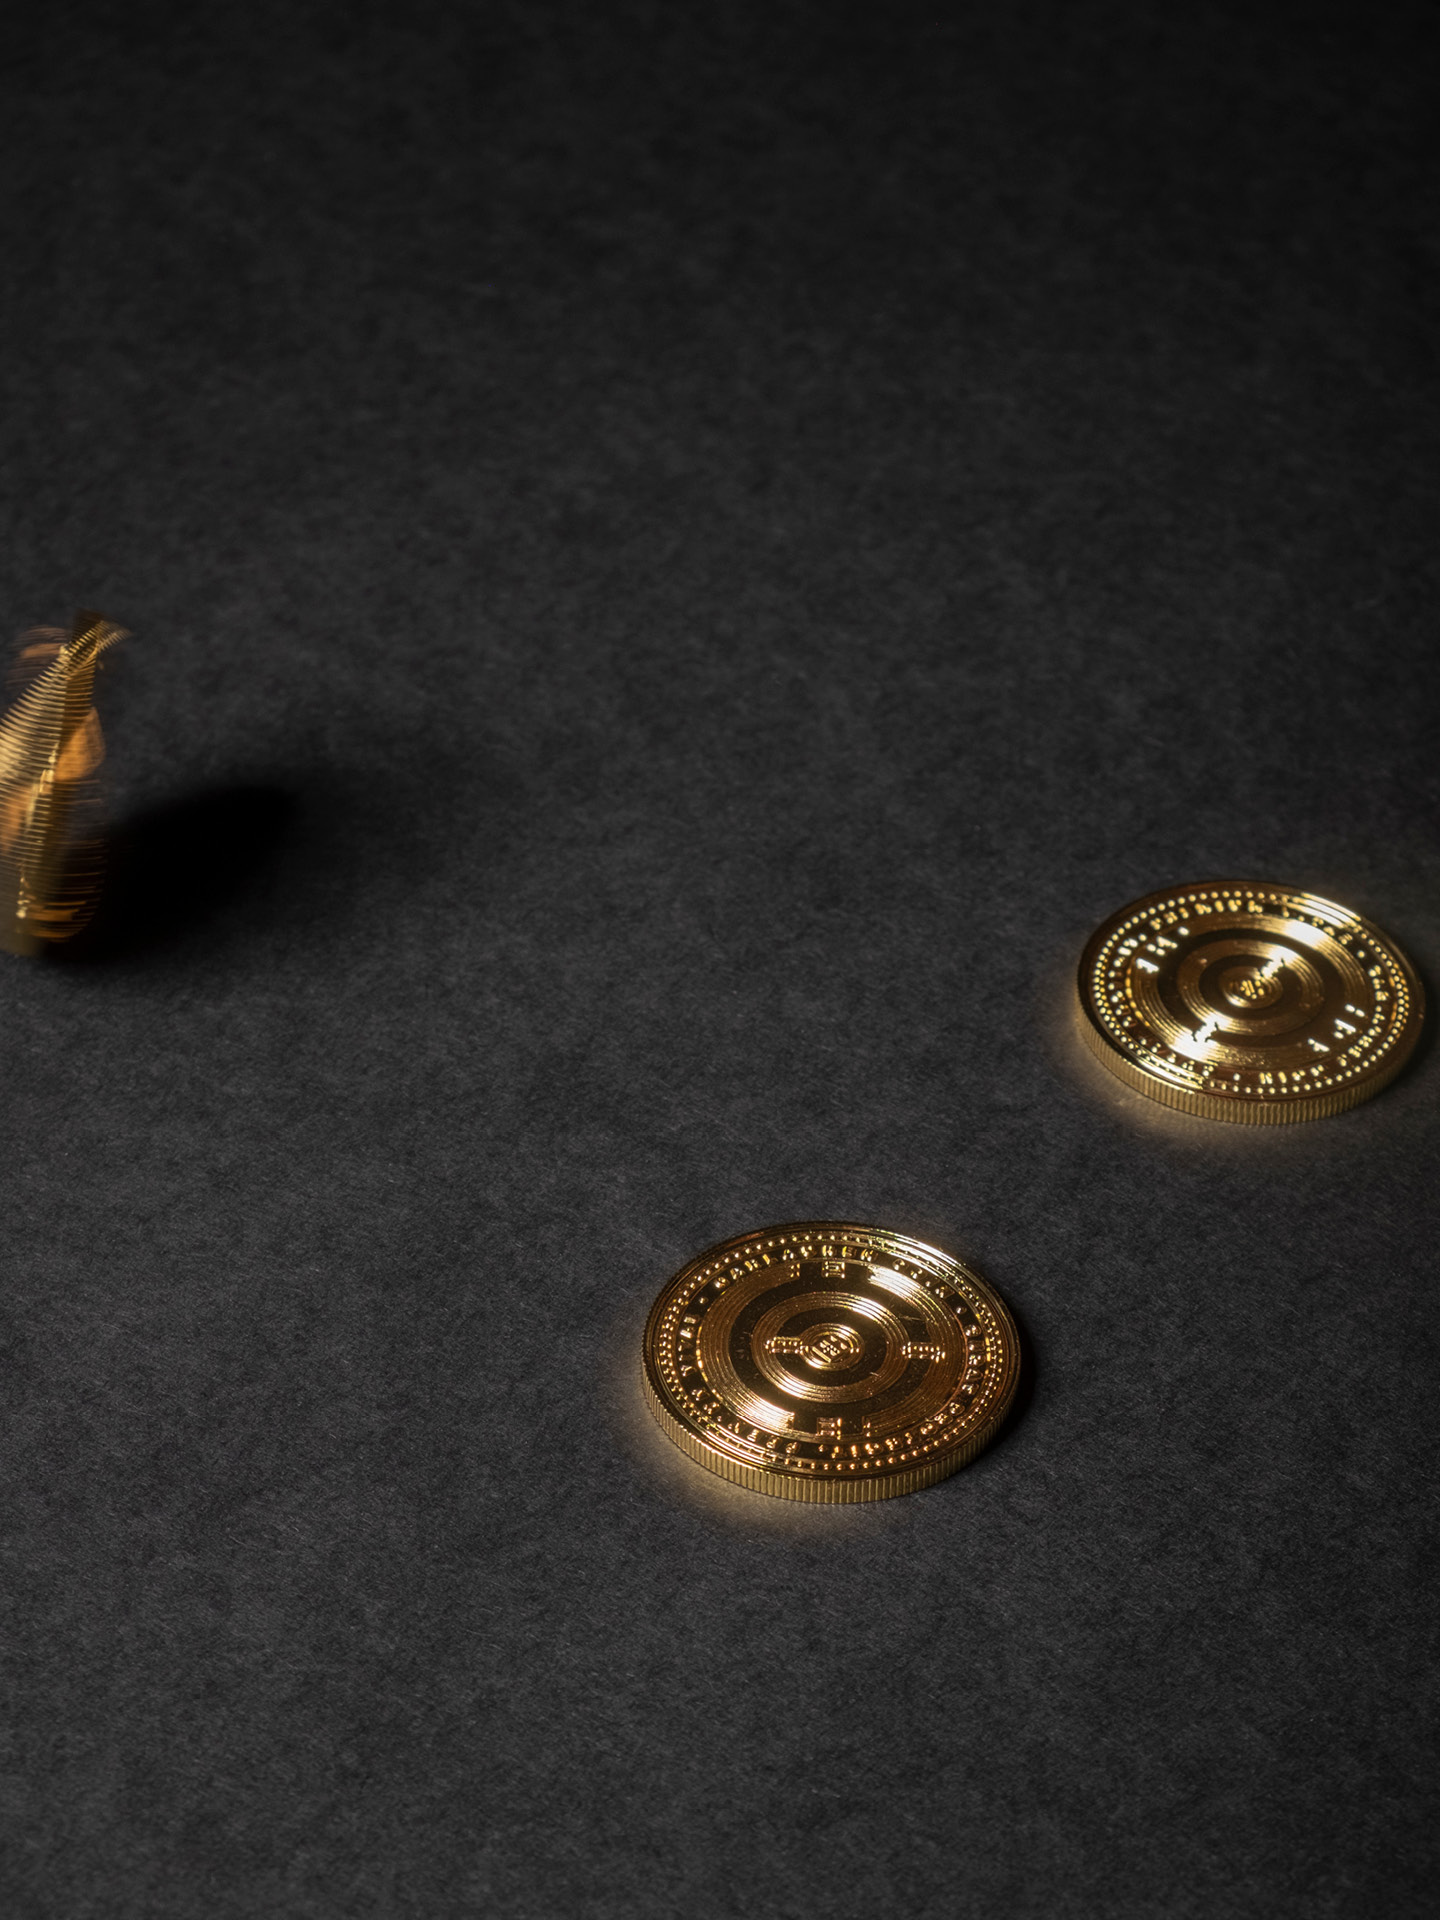 Three golden coins made for the digital current promoted by the brand